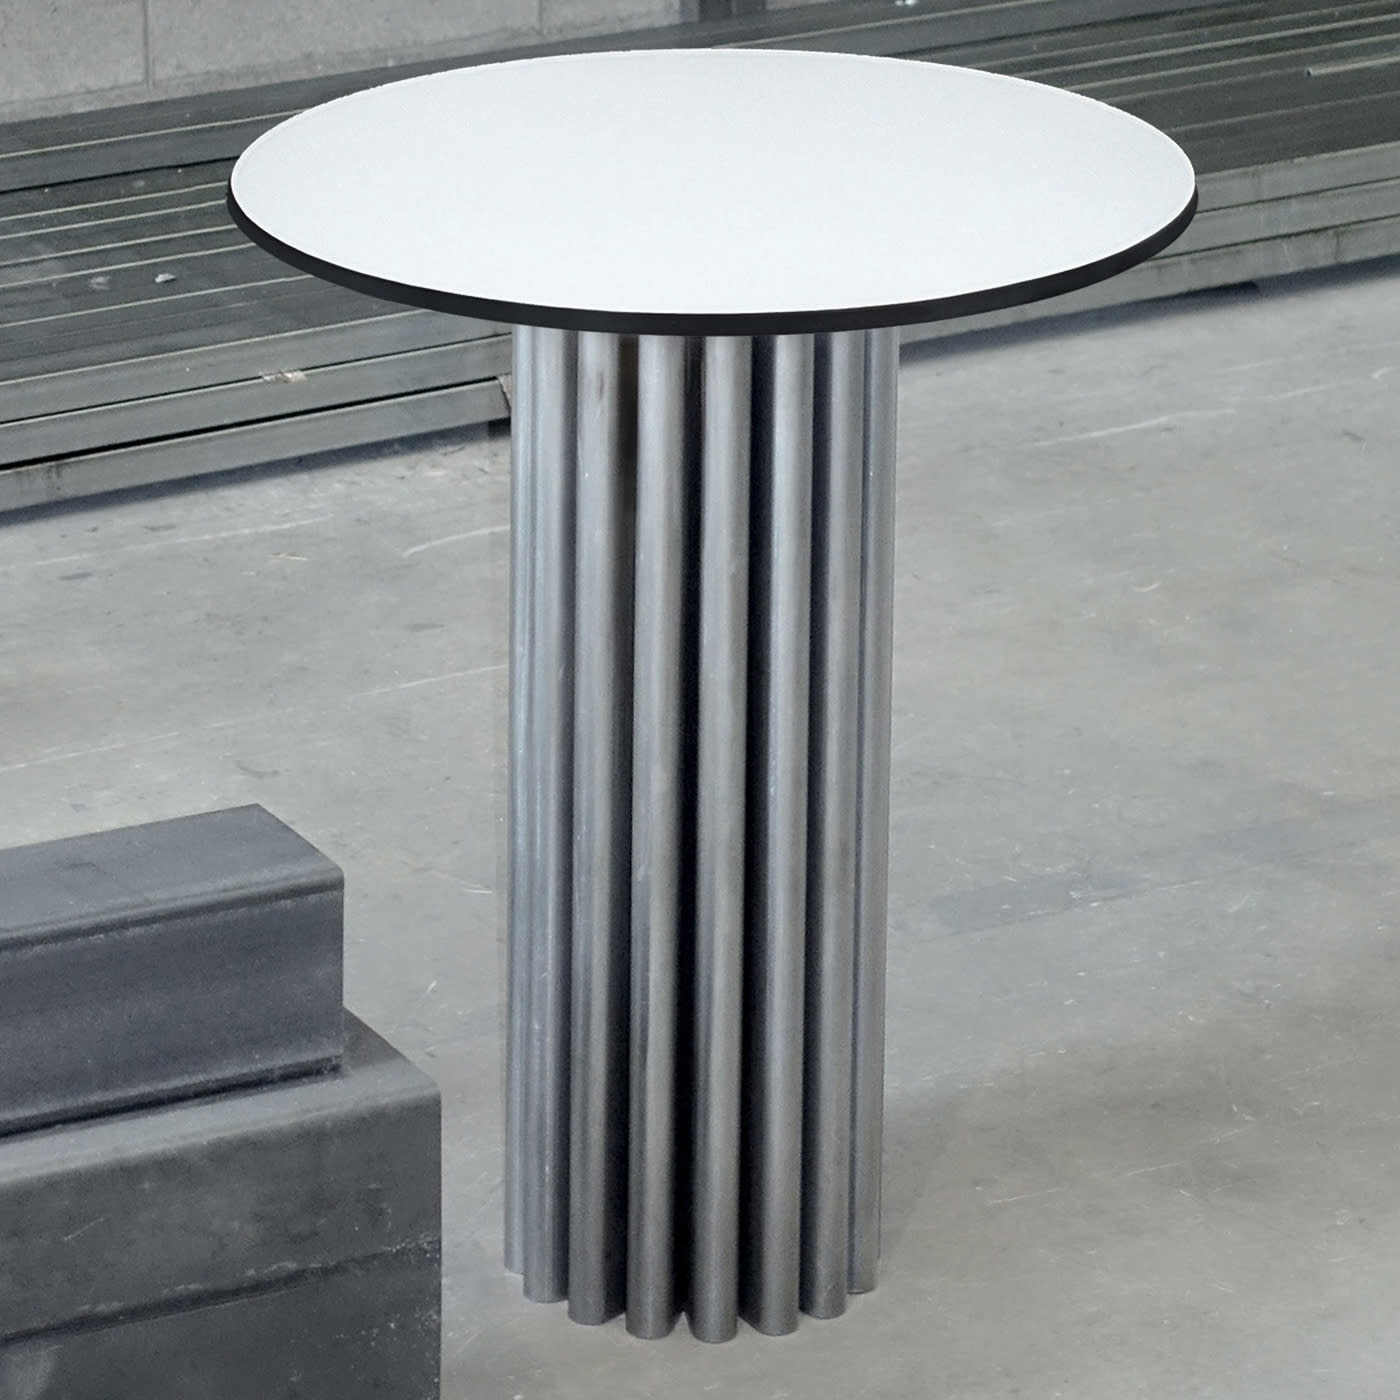 T-ST02 High Side Table - Temper